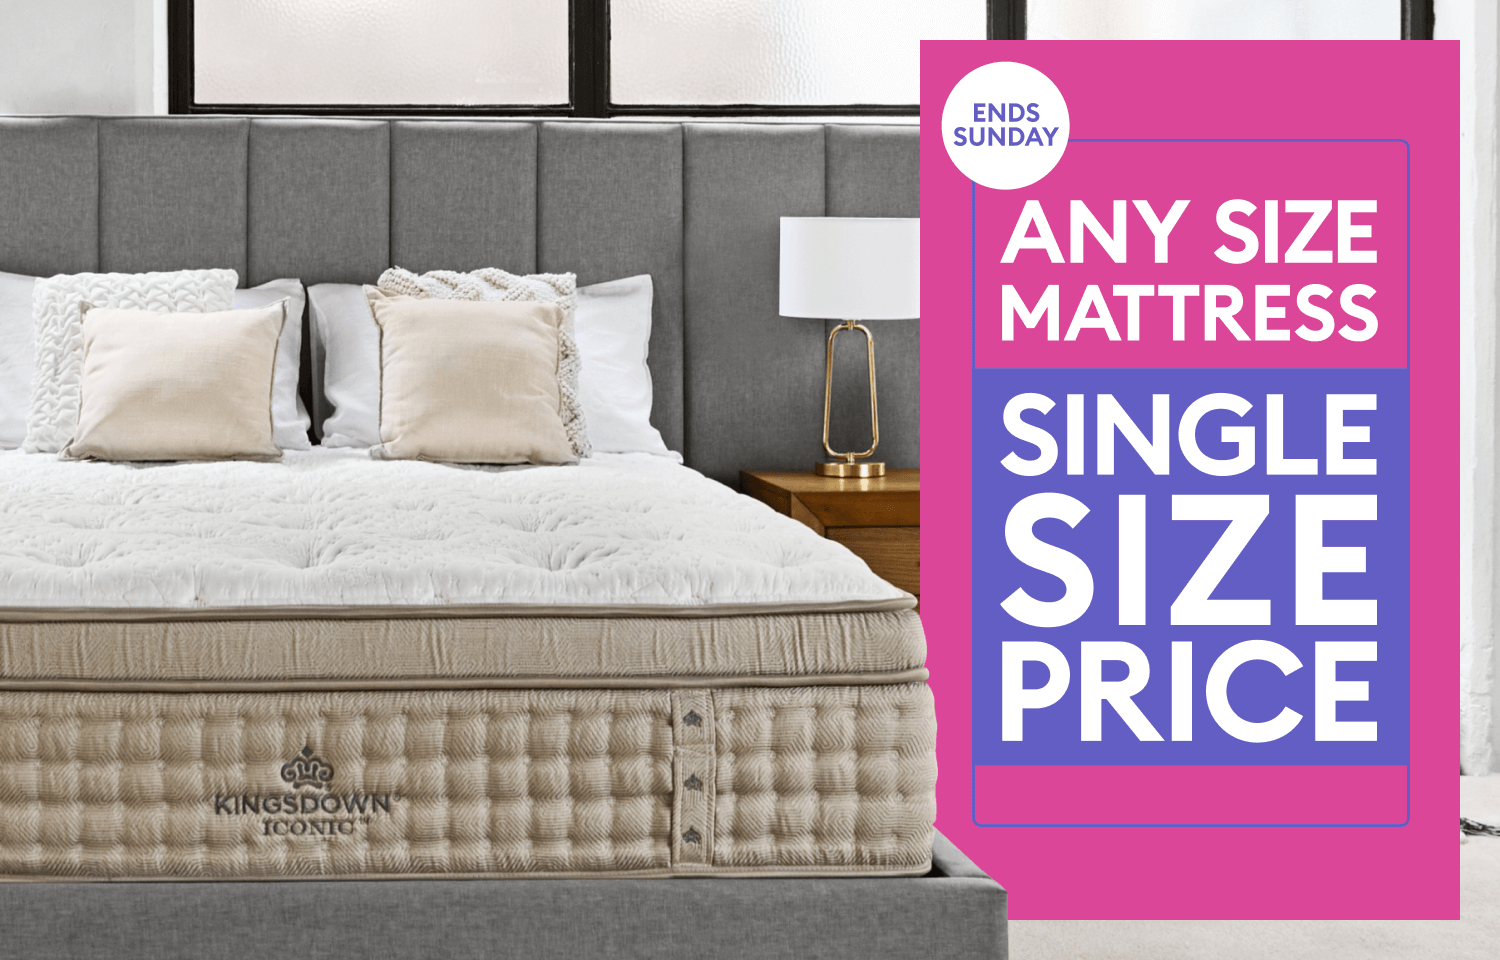 Any Size Mattress & 30% Off Bed Frames - End Sunday | Bedshed